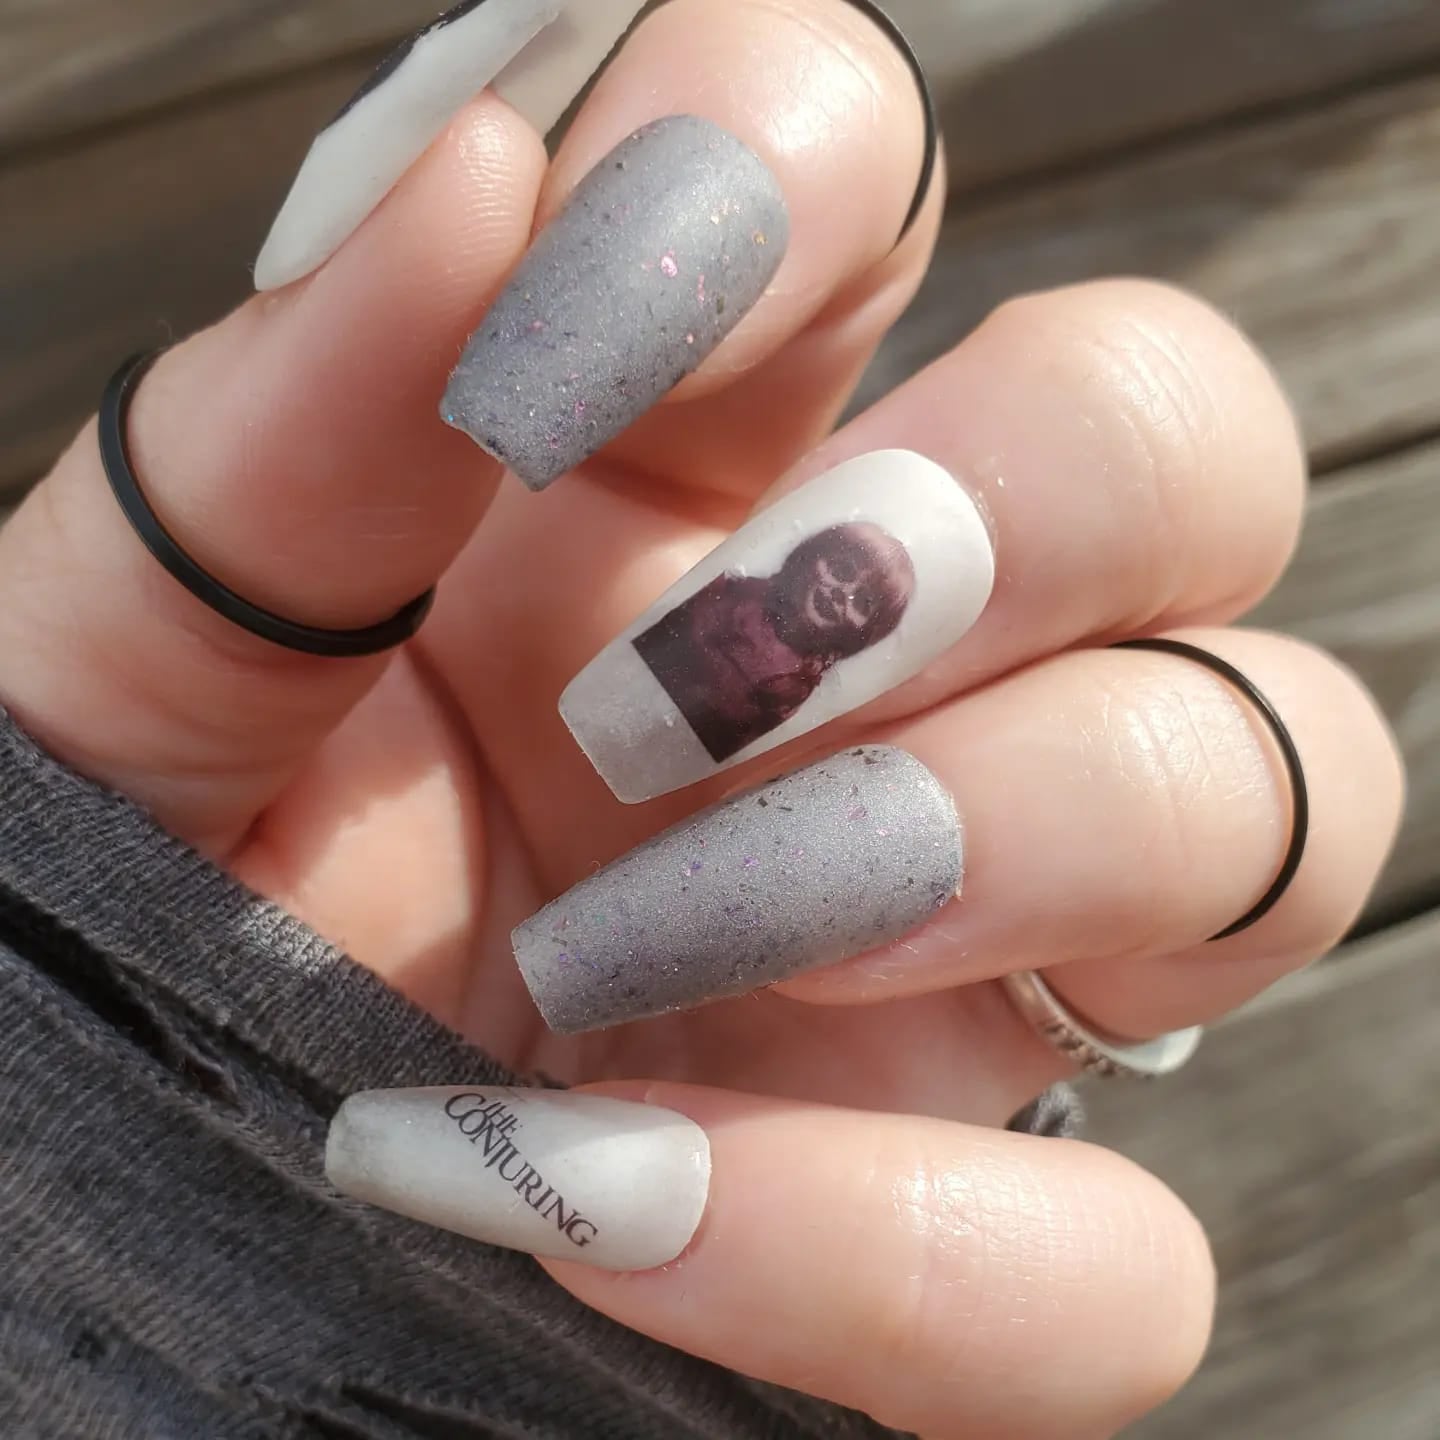 Halloween Nail Art Decals - The devil exists. God exists.- The conjuring